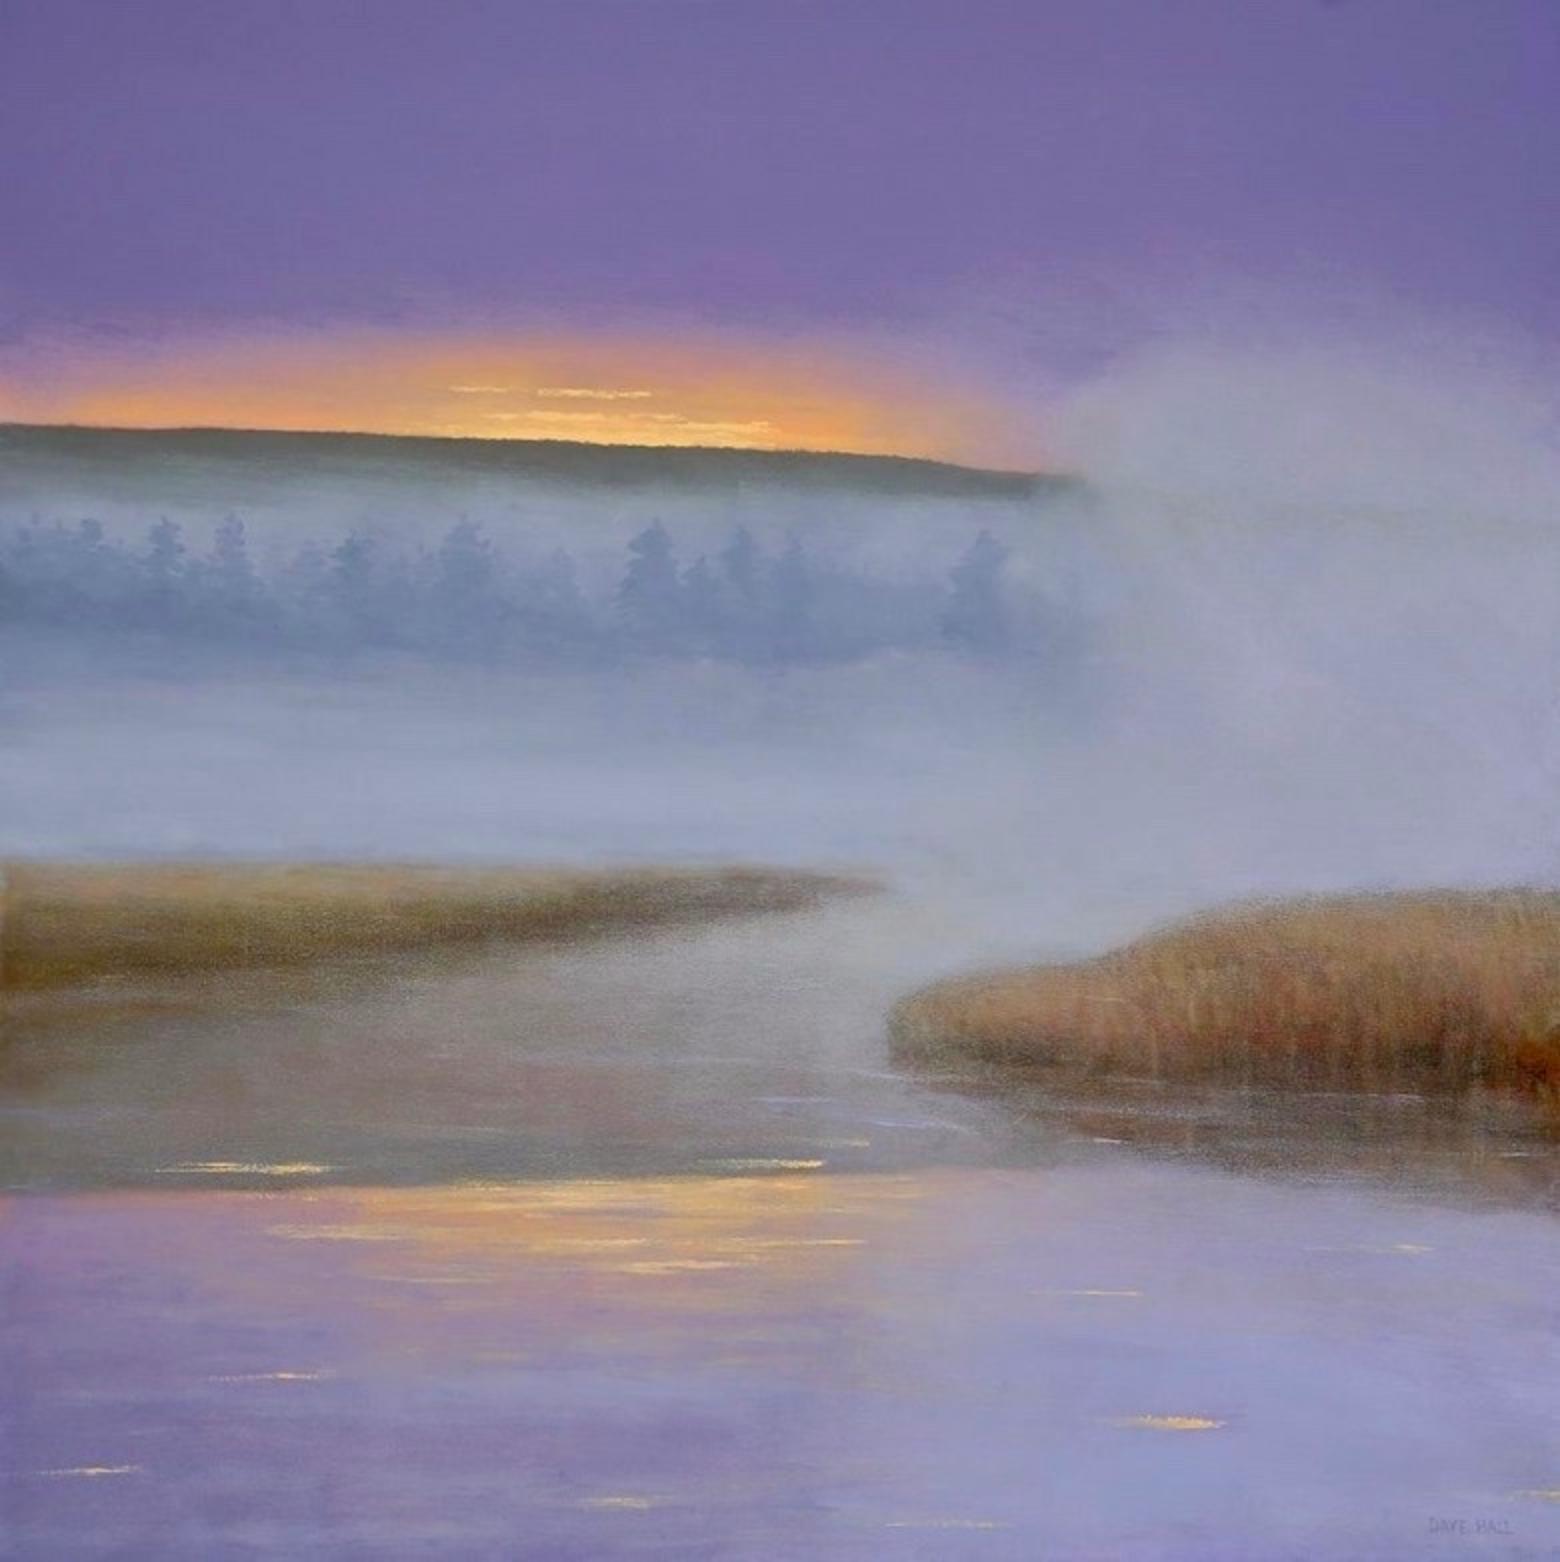 "Dawn in Lavender," a painting by Dave Hall. You can put a signed, limited edition reproduction of this work on your wall. Of the inspiration for the scene, Hall writes: "For years I've hiked with friends and camped in a favorite Yellowstone location, along the banks of a favorite Yellowstone creek (both of which shall go unnamed)—there I've seen wolf tracks in the gravel meanders and over the years grizzly mothers have taught their cubs the ways of the world in the meadows. We are visitors to their wild home. A painting is a good way to experience their place without taking from it. This work celebrates the sunrise."